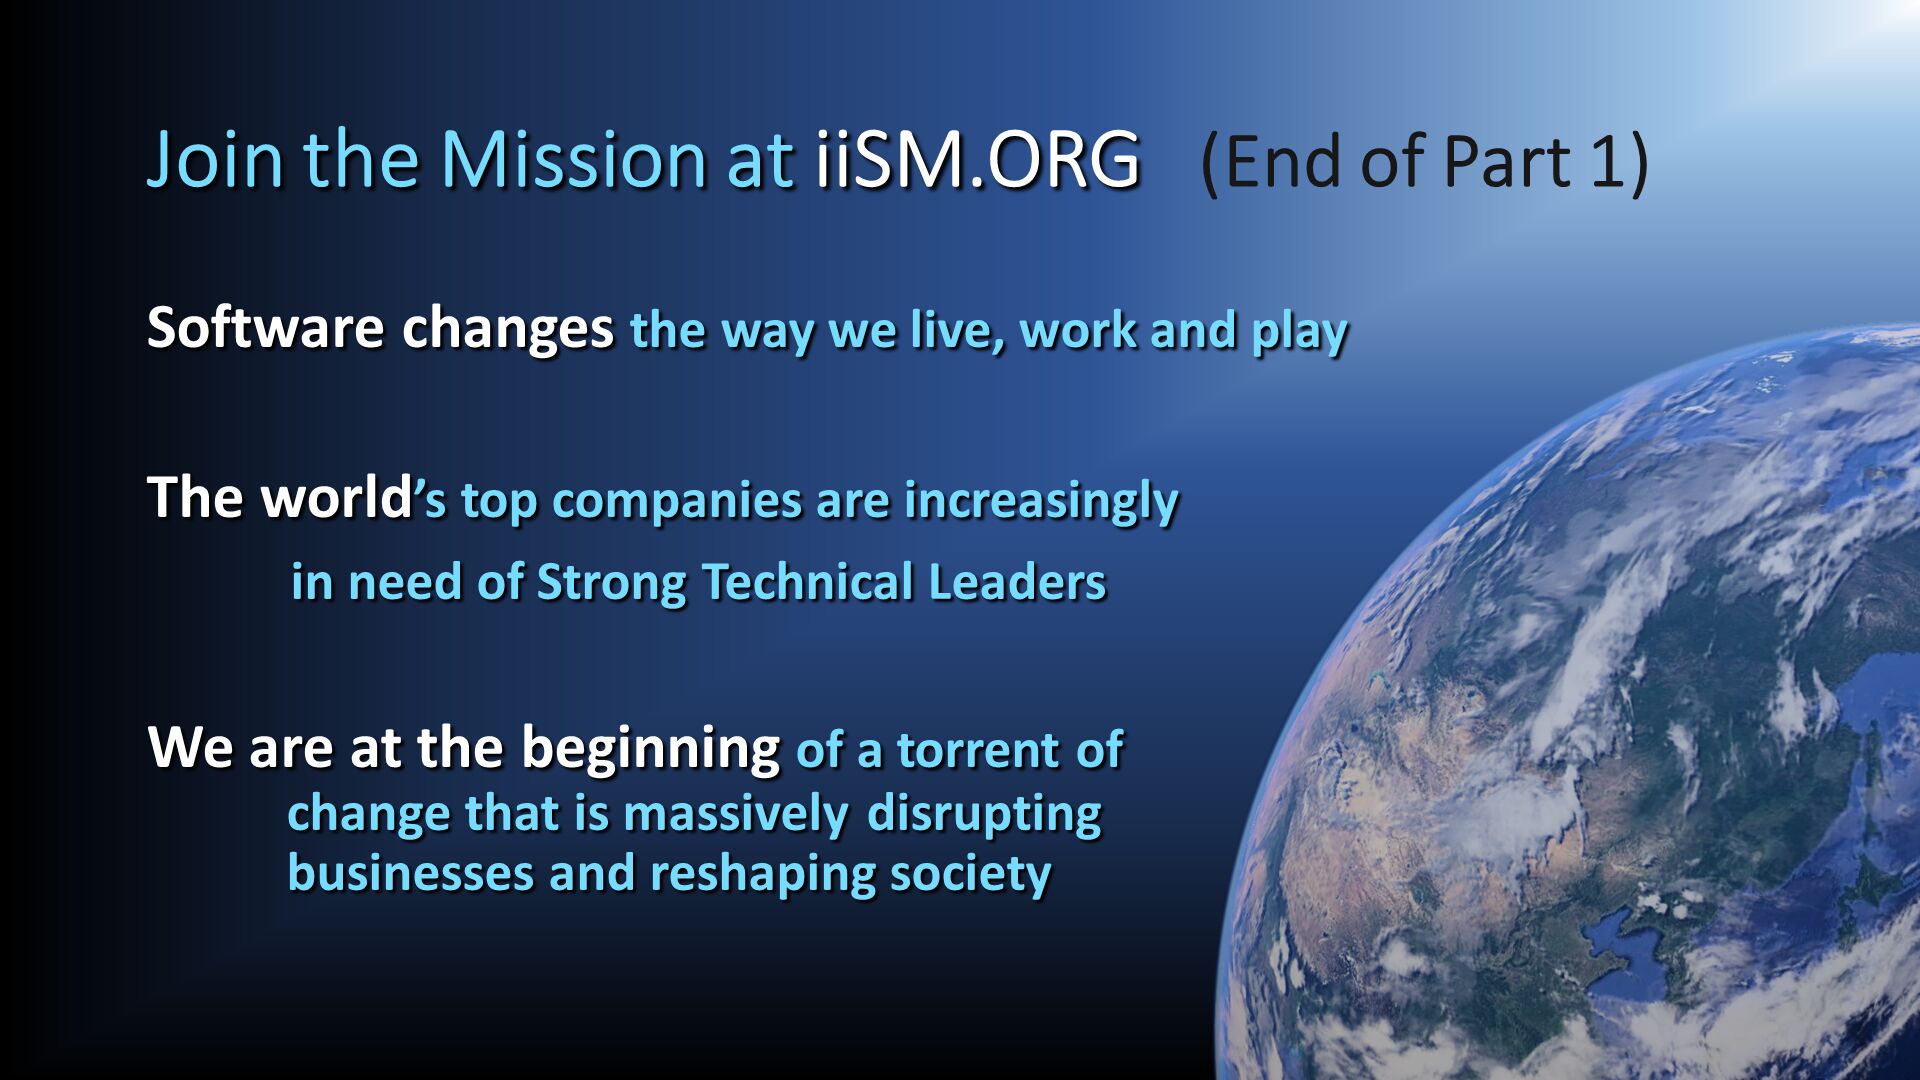 Join the Mission at iiSM.ORG   (End of Part 1). Software changes the way we live, work and play
	 
The world’s top companies are increasingly
	in need of Strong Technical Leaders

We are at the beginning of a torrent of            change that is massively	disrupting            businesses and reshaping society. 